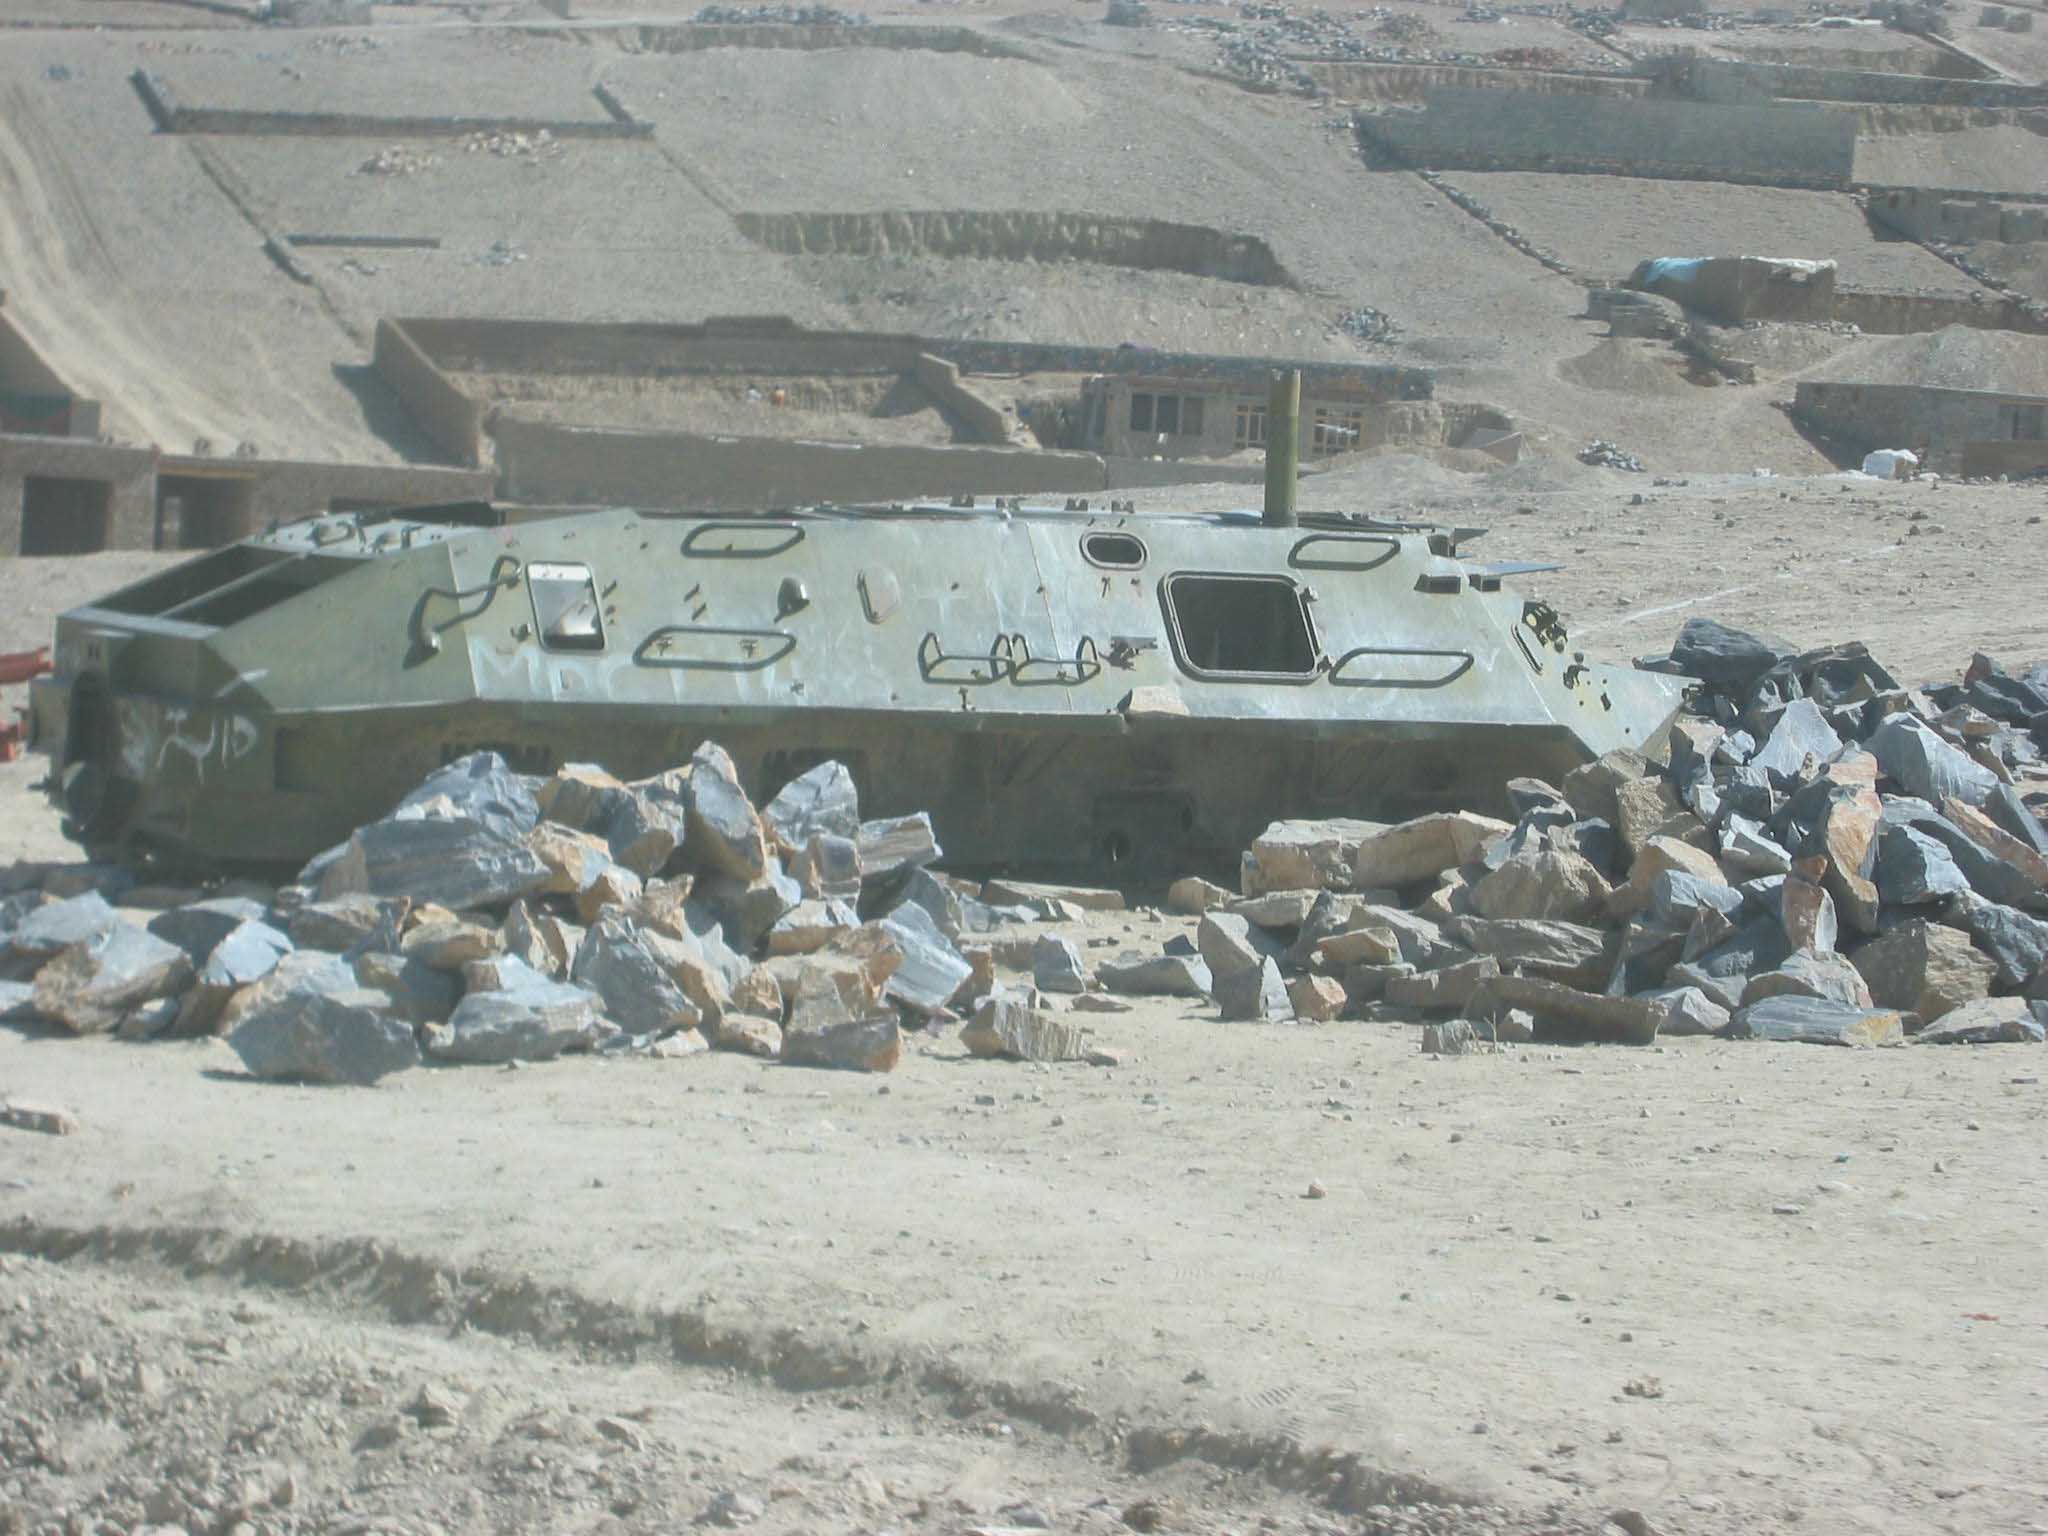 The hull of a Soviet BTR armoured personnel carrier is all that's left after locals in a village near Kabul strip it down for scrap